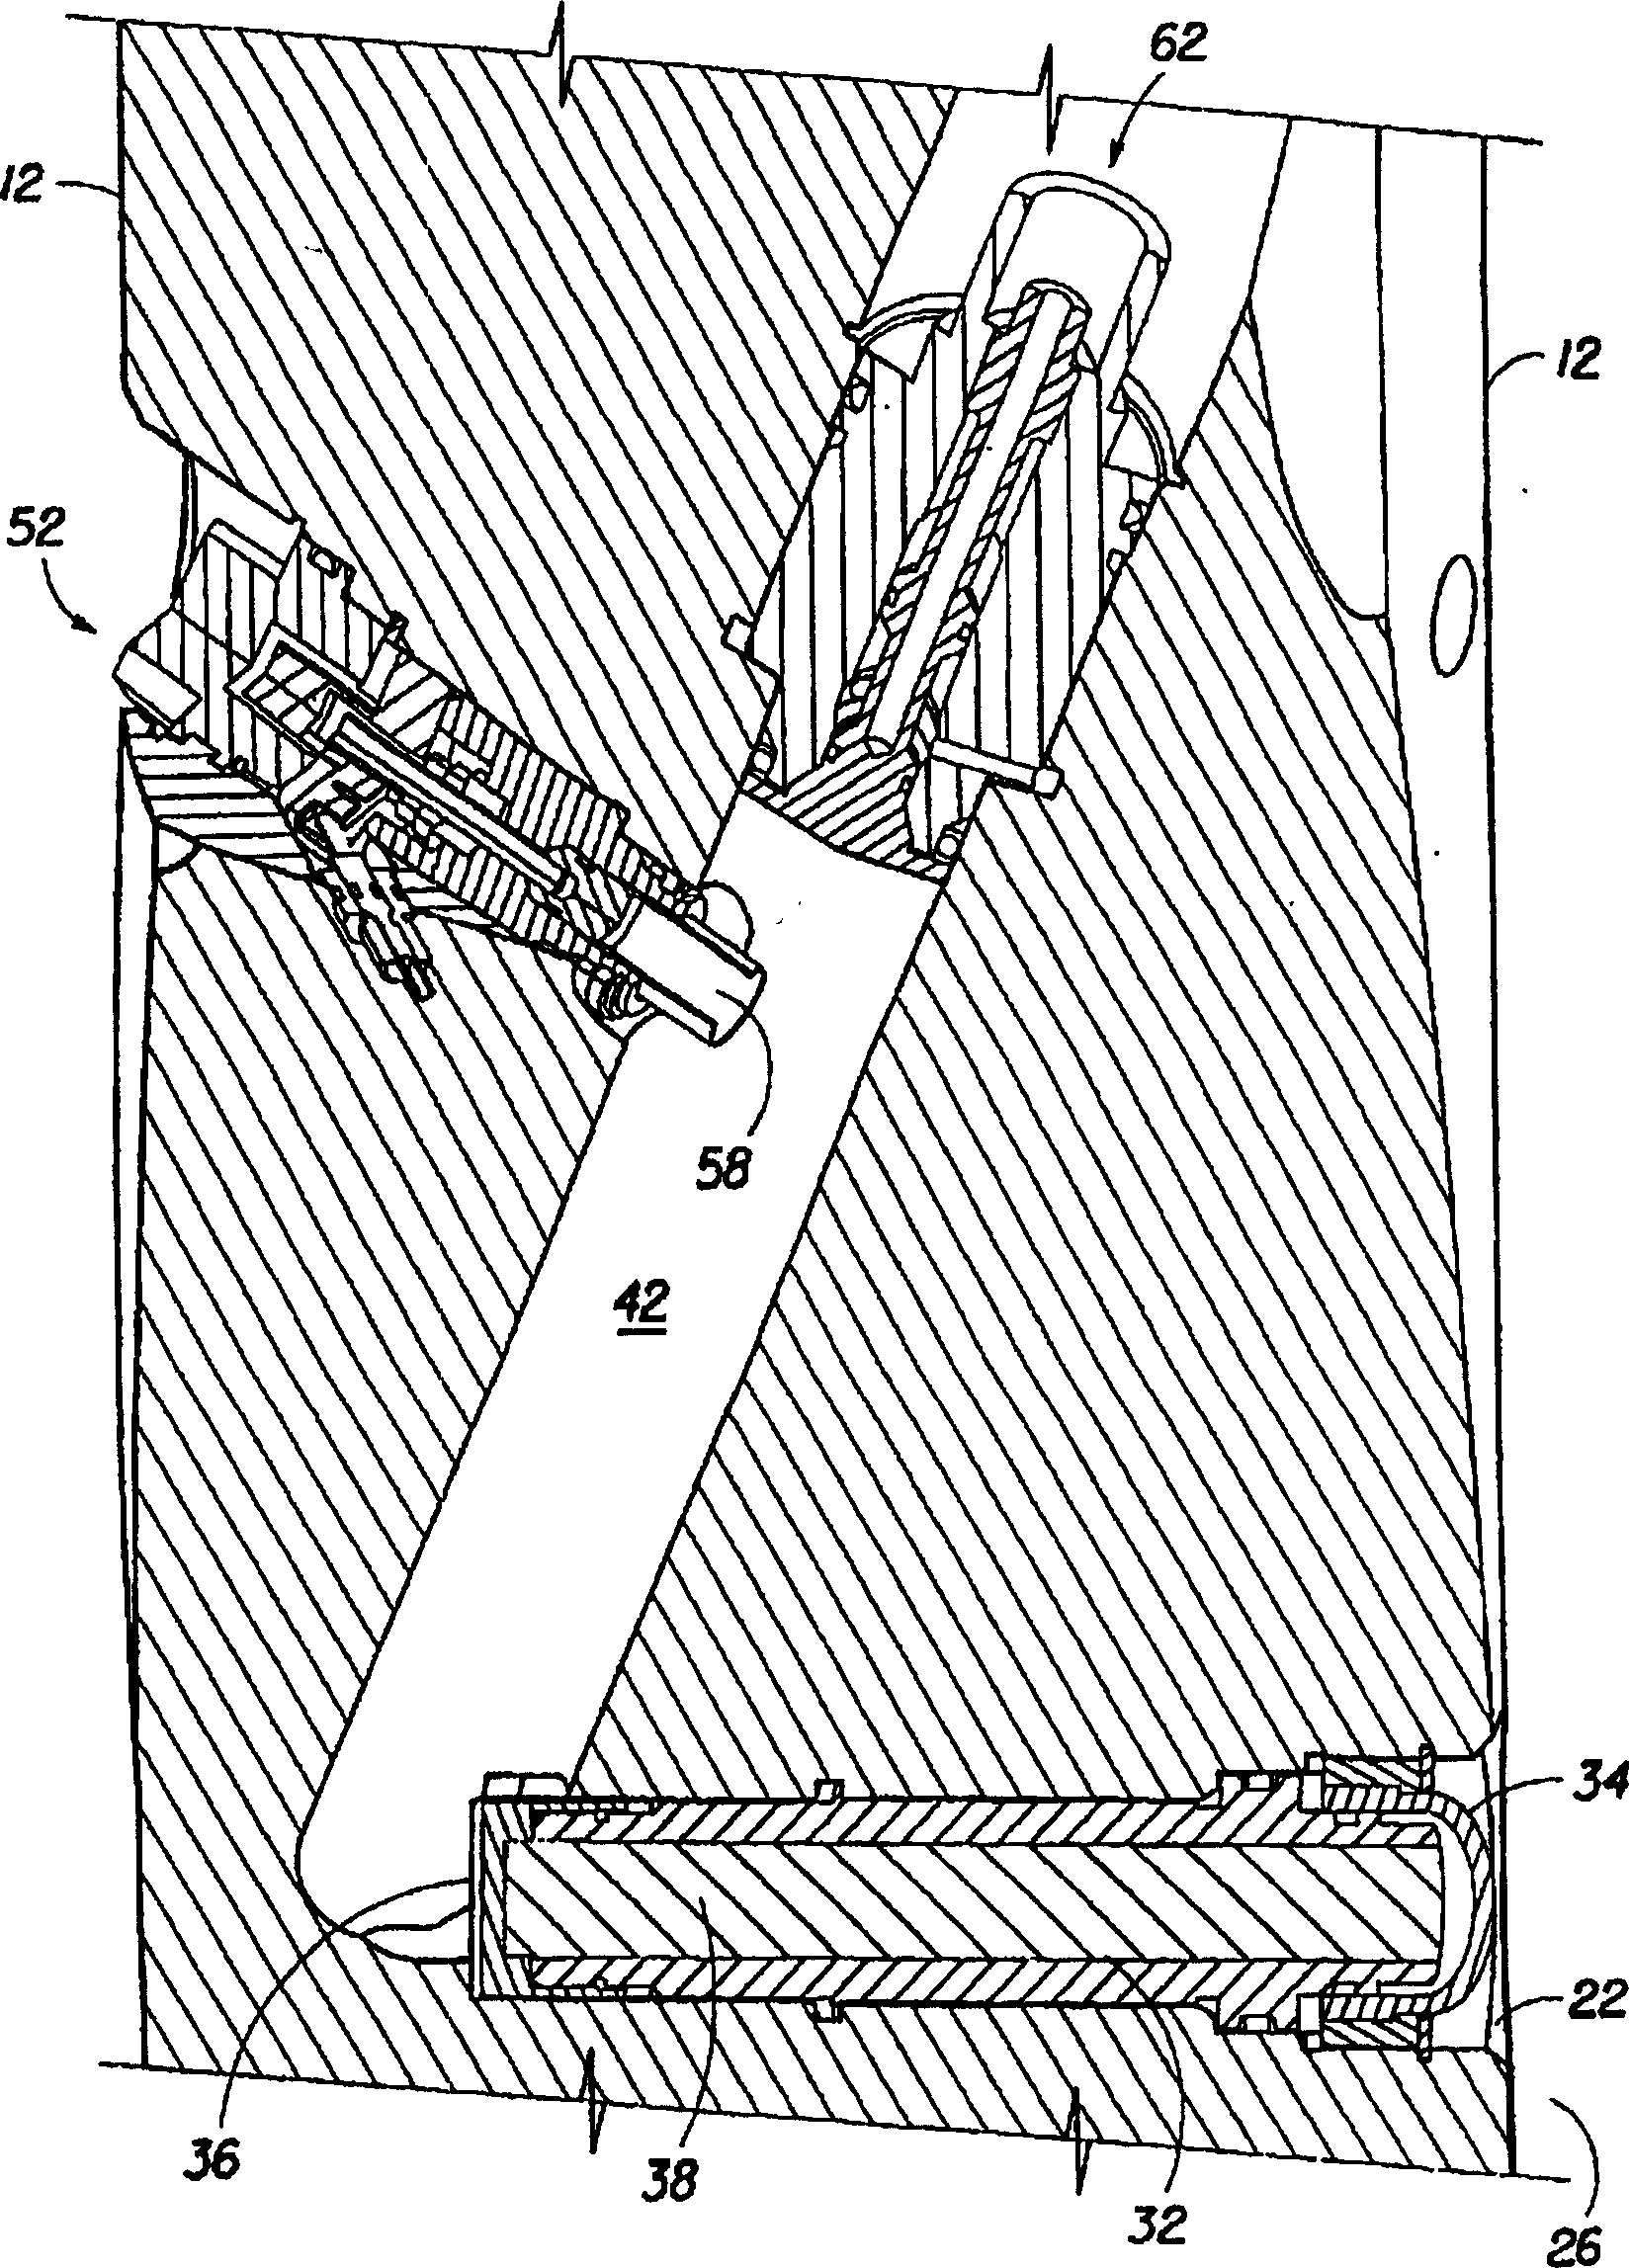 Apparatus and method for placing data testing device into under-ground rock stratum